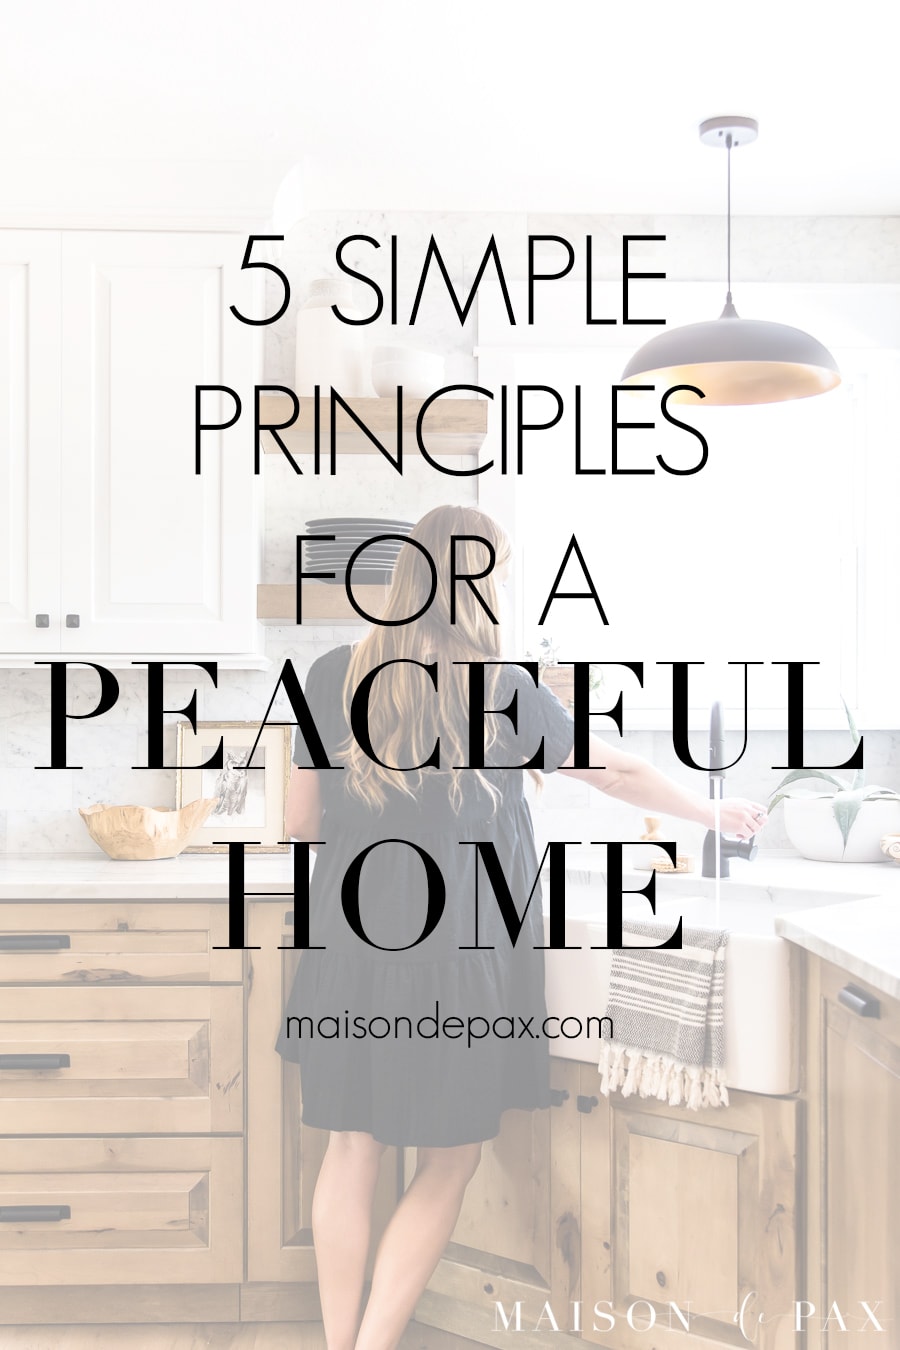 5 simple principles for a peaceful home